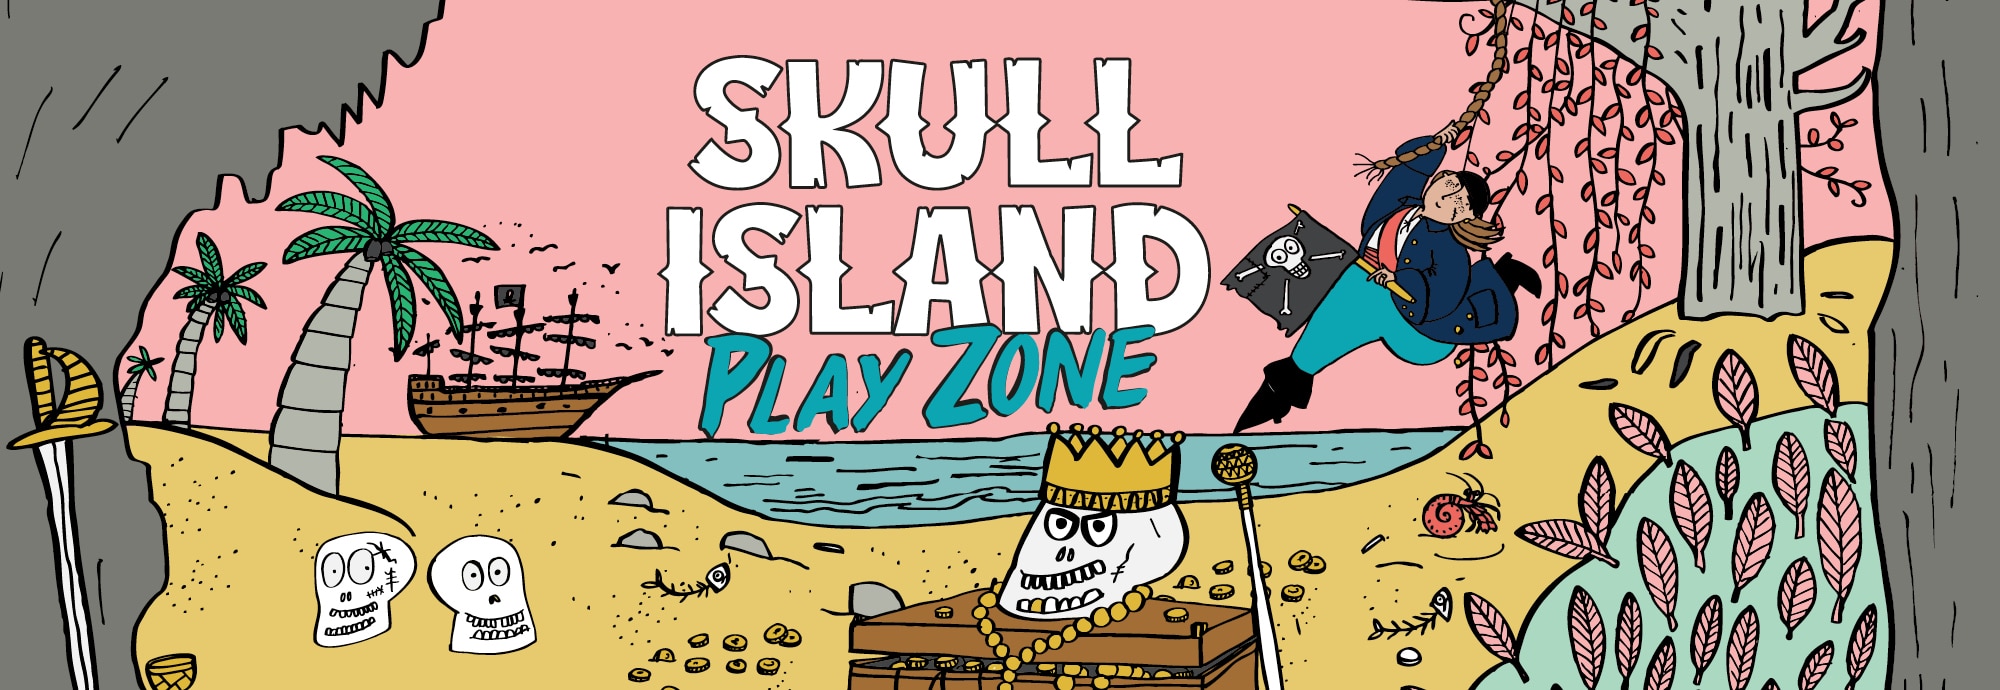 Digital art with the text 'Skull Island Play Zone' in the centre, with a skull on top of a treasure chest directly underneath. On the left, a pirate ship is out at sea, while on shore there are two skulls, some gold coins half buried in the sand, three palm trees and a sword. On the left, a pirate swings from a rope attached to a tree.